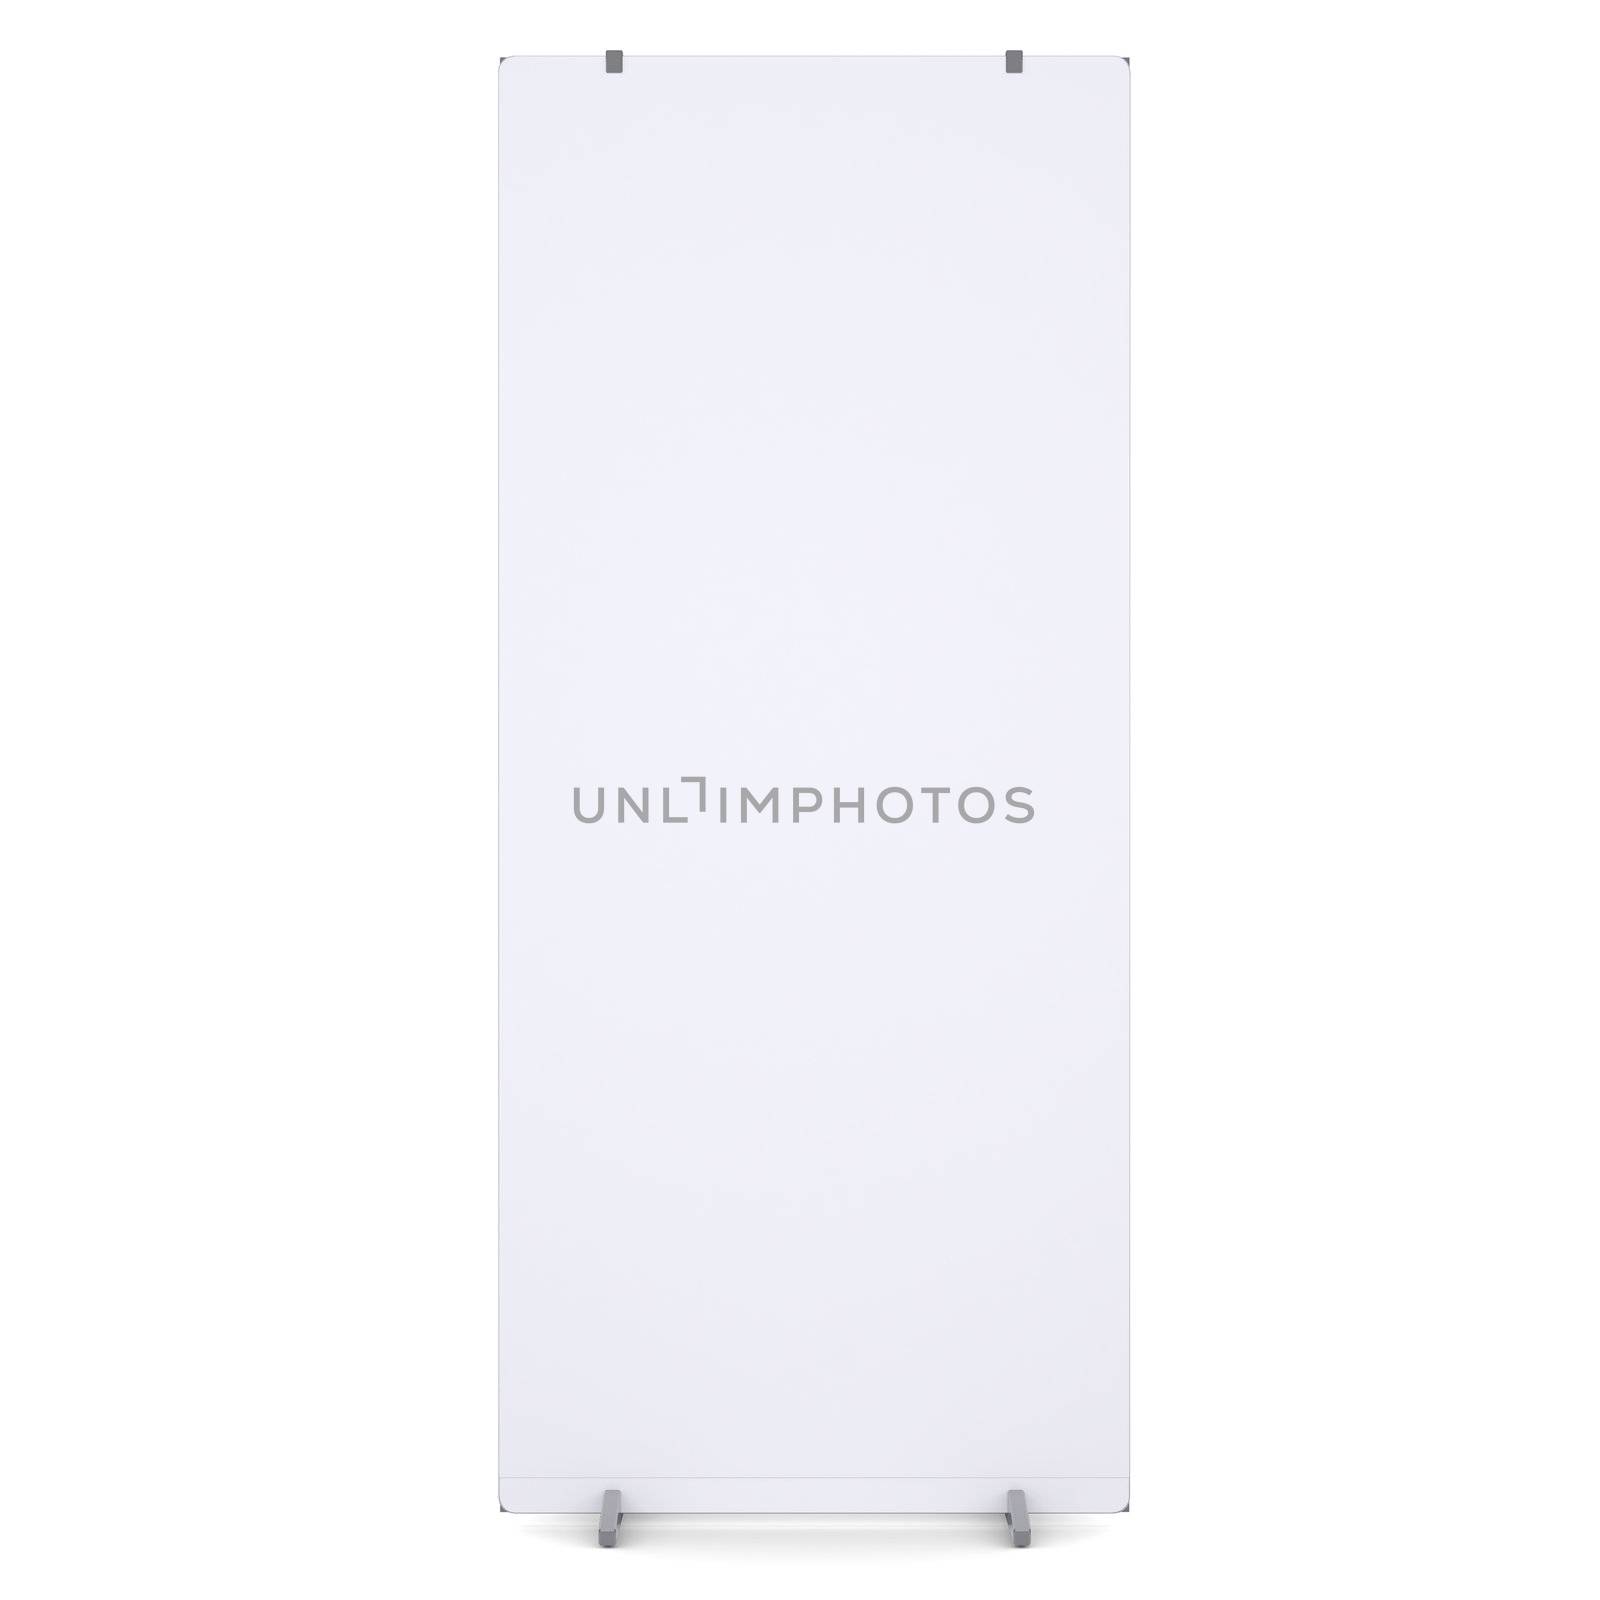 White advertising billboard. Isolated render on a white background